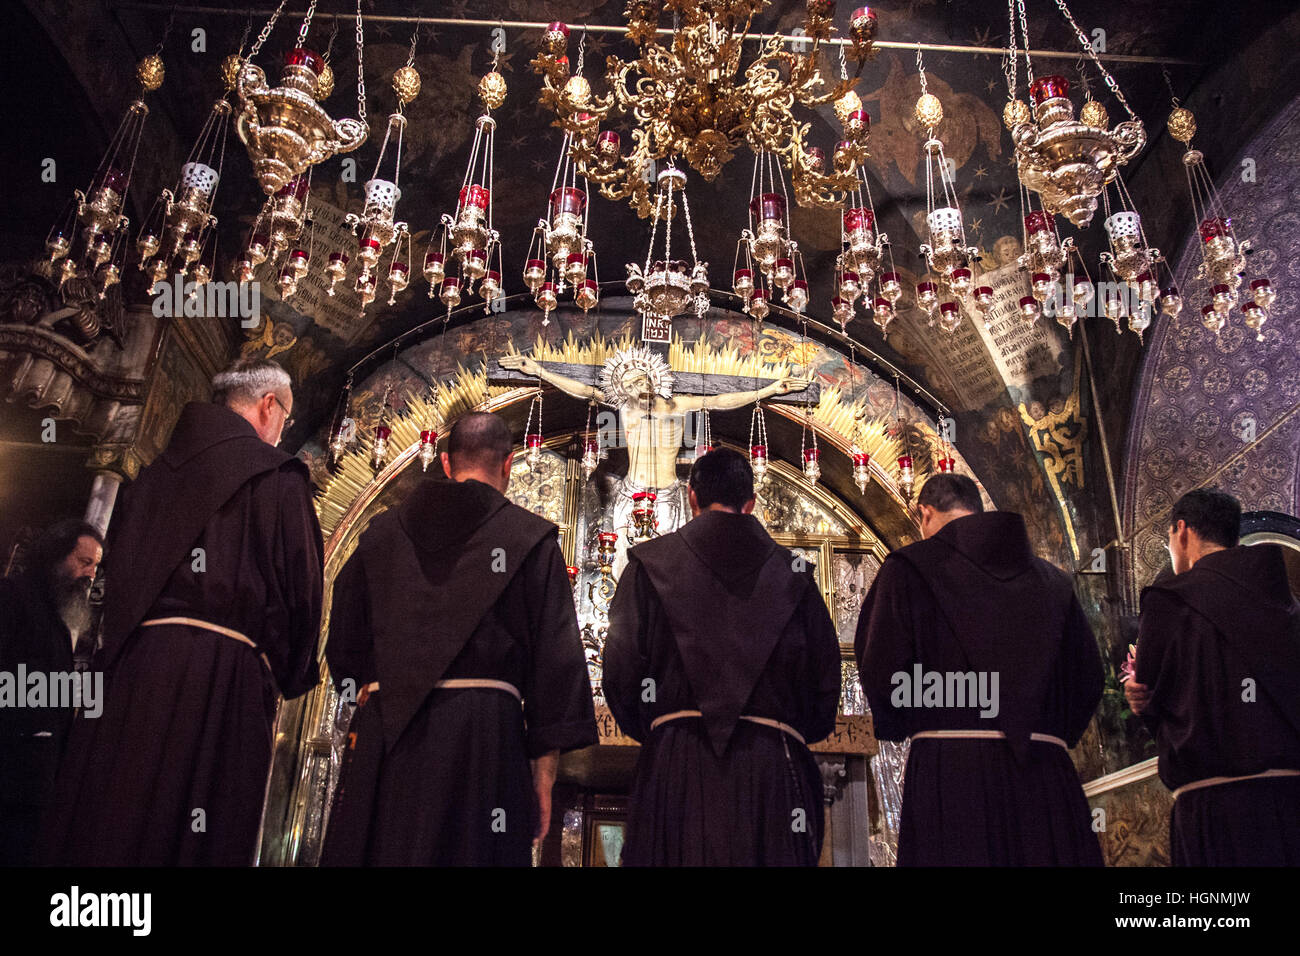 Jerusalem, Israel - July 18, 2014: Franciscan monks pray by the Crucifixion Altar in the Church of Holy Sepulchre during via Dolorosa precession. Stock Photo